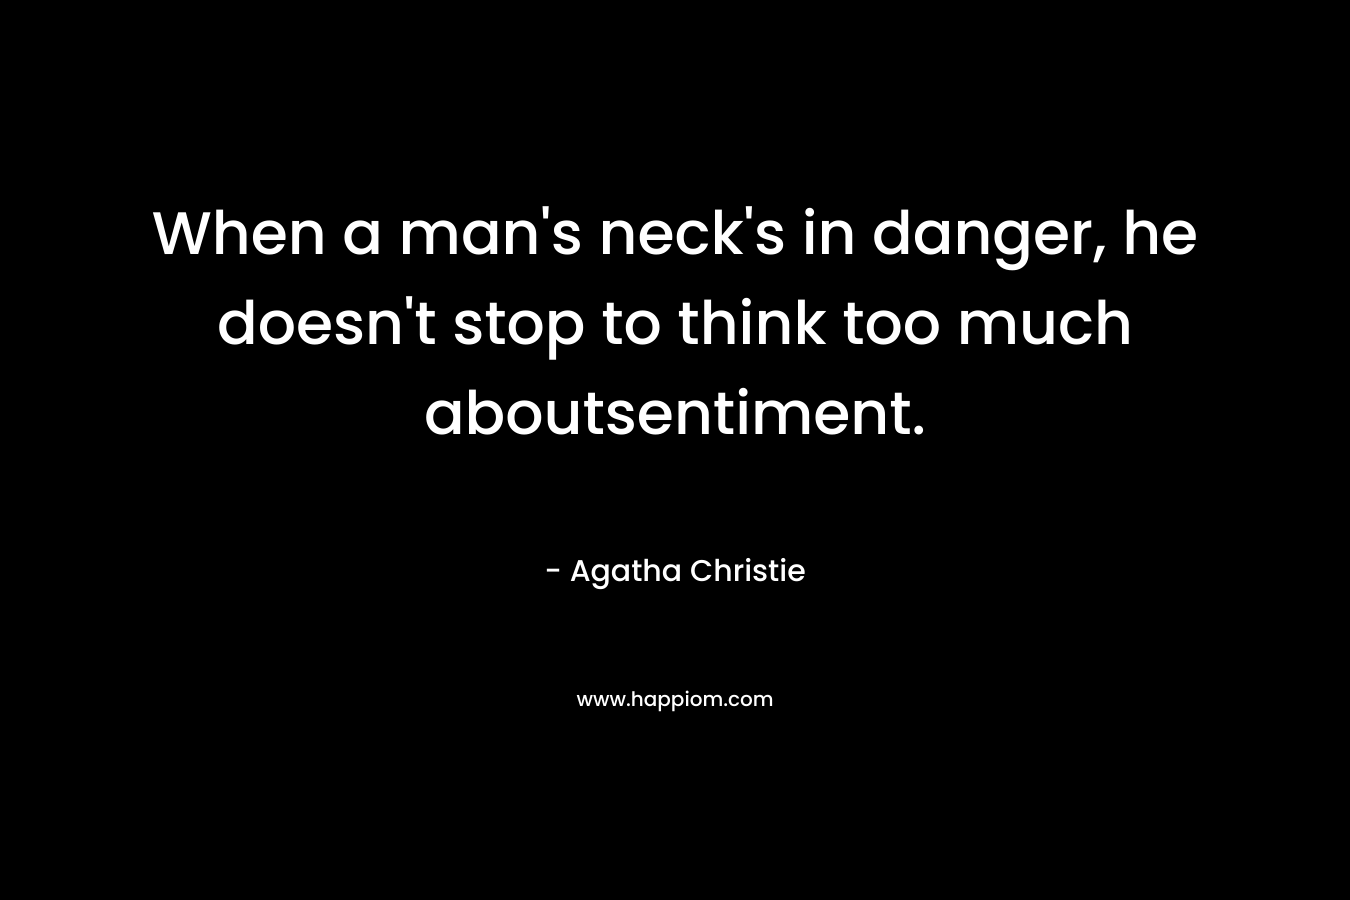 When a man’s neck’s in danger, he doesn’t stop to think too much aboutsentiment. – Agatha Christie